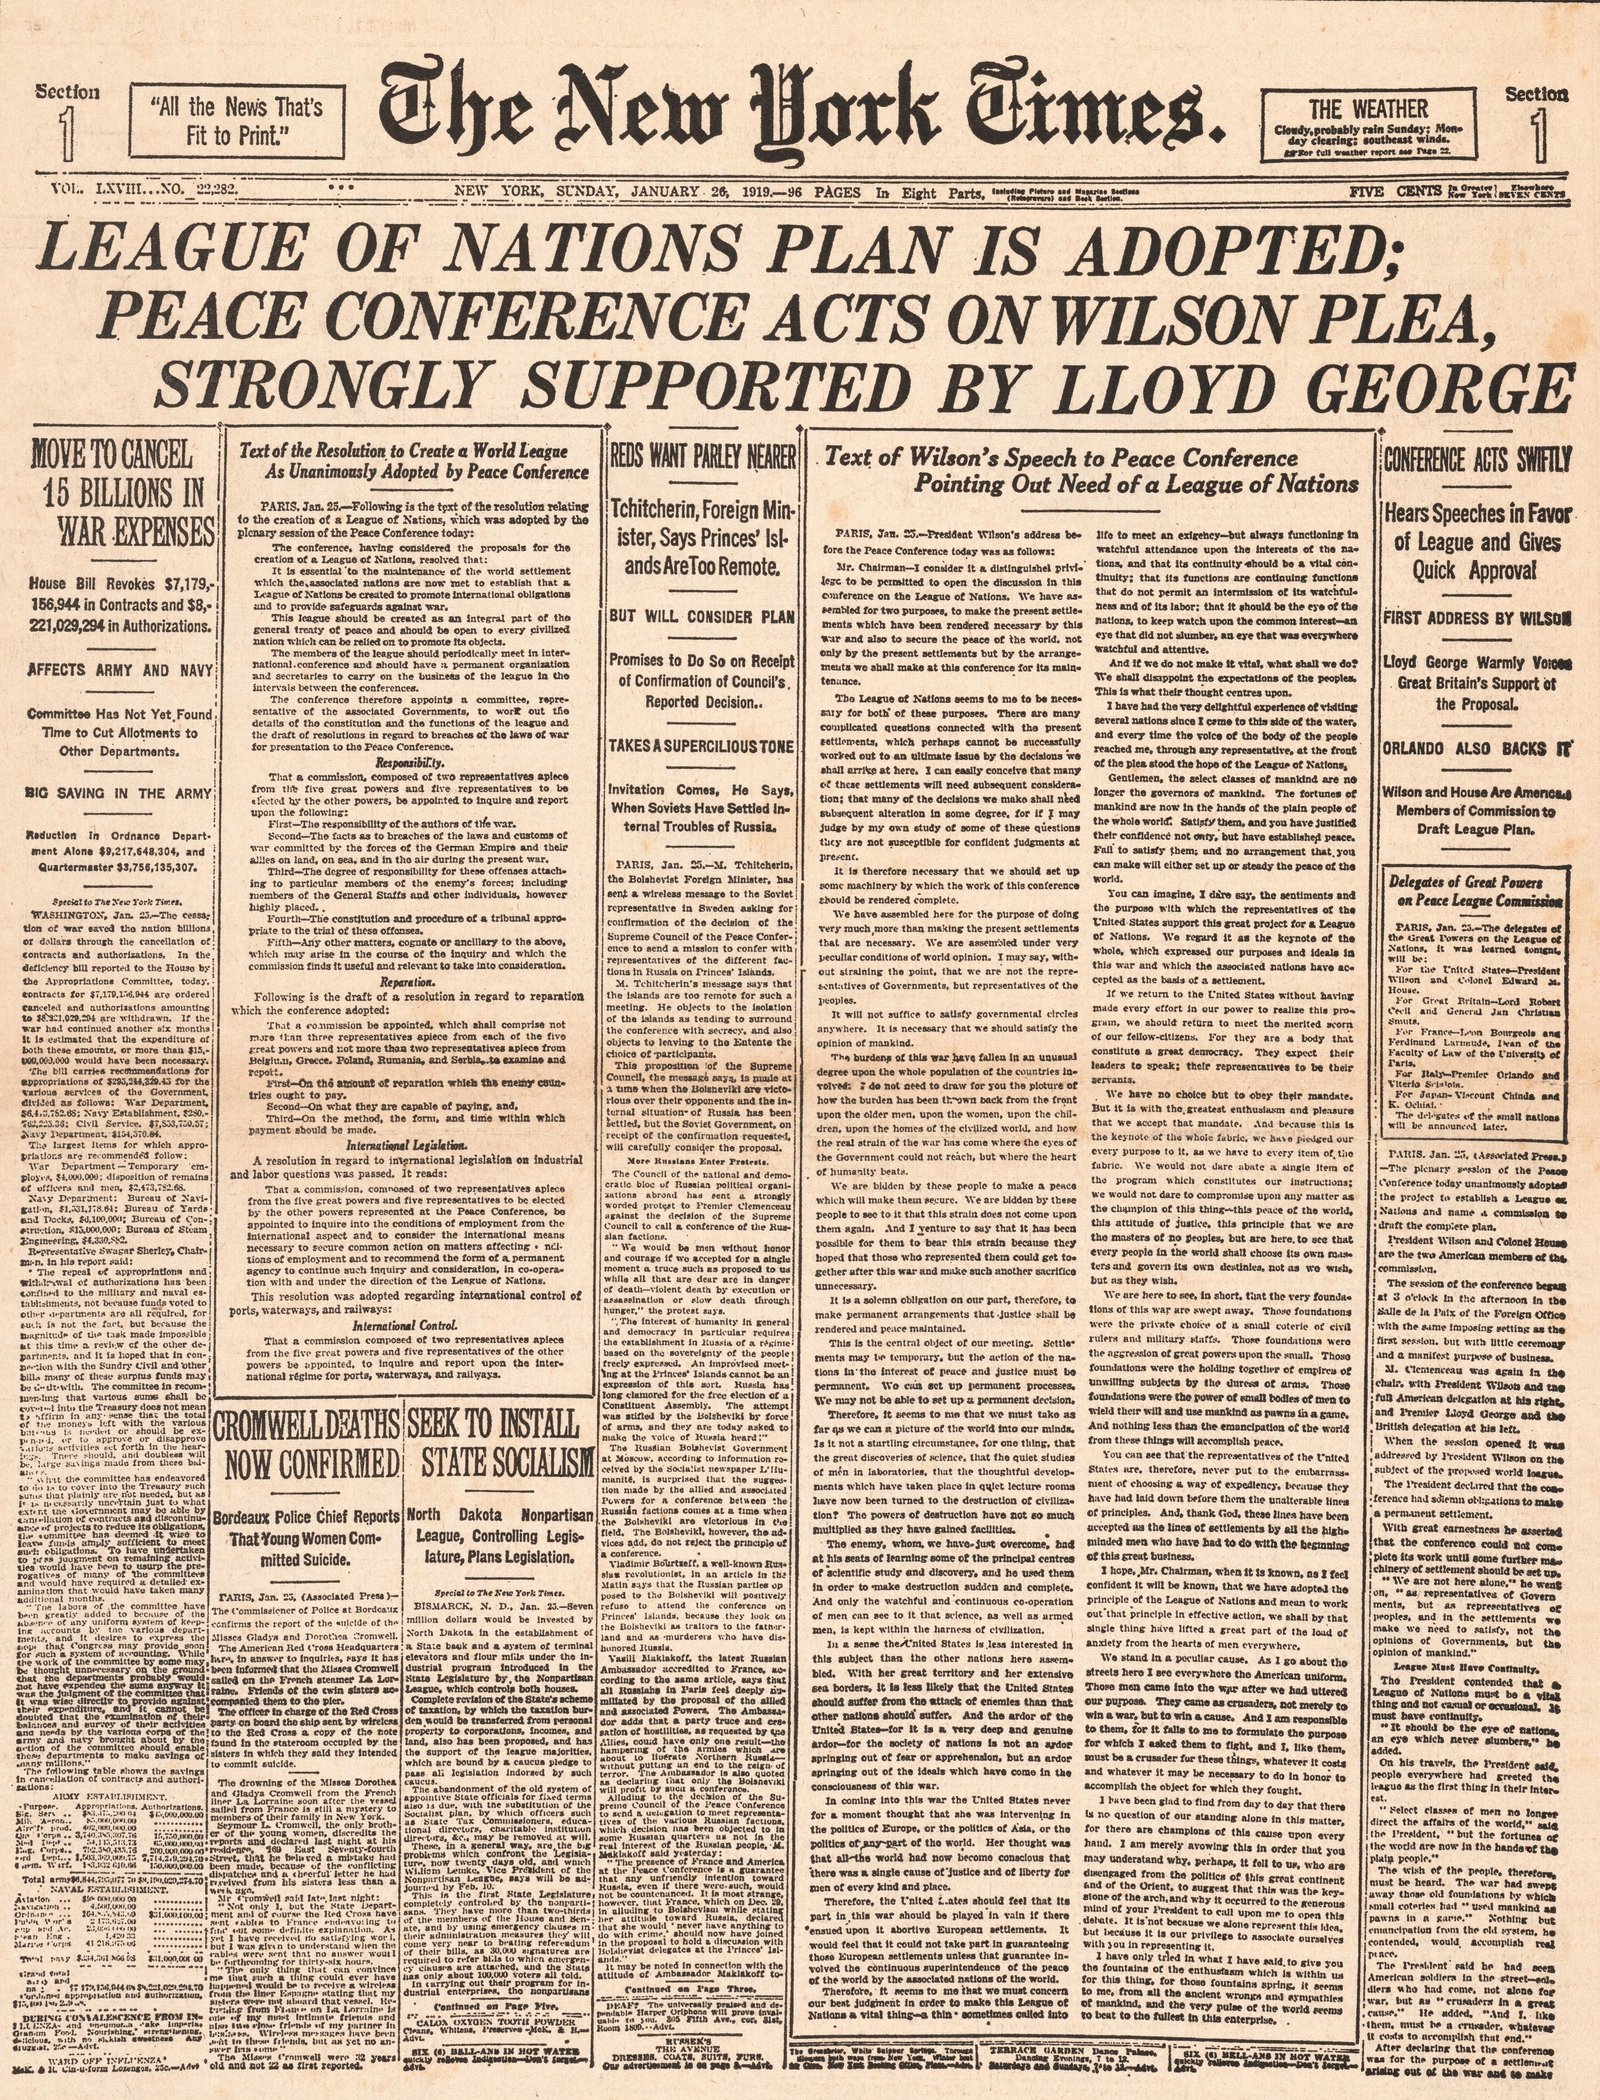 Image - The New York Times front page announces the creation of the League of Nations, January 1919 (Credit: Alamy Images)